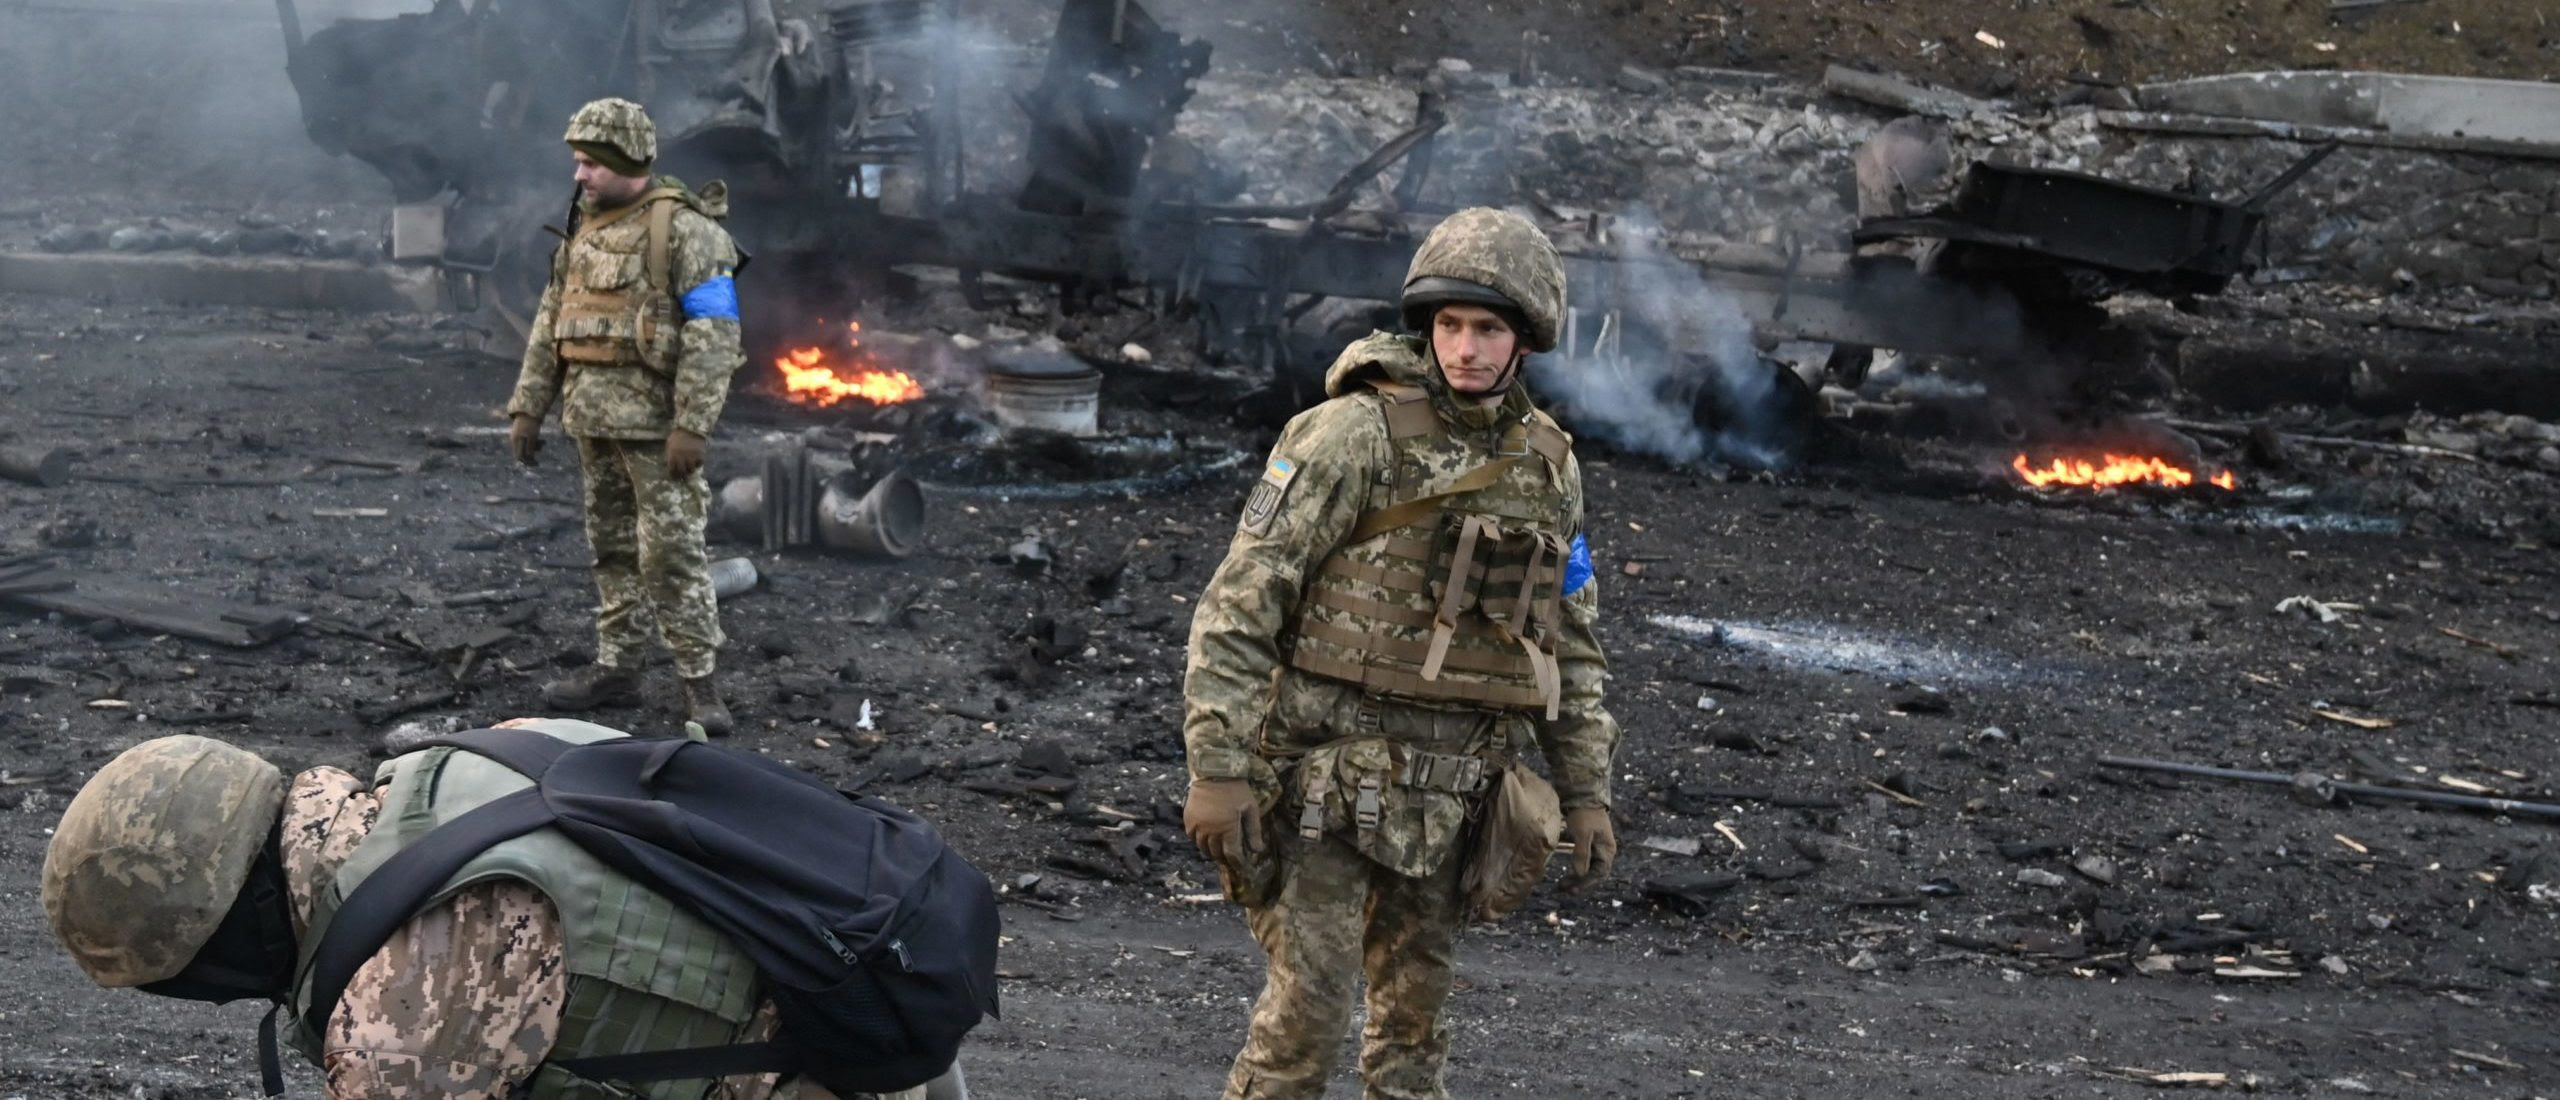 21 US Federal Agencies Are Analyzing The ‘Environmental Damage’ Of Ukraine War